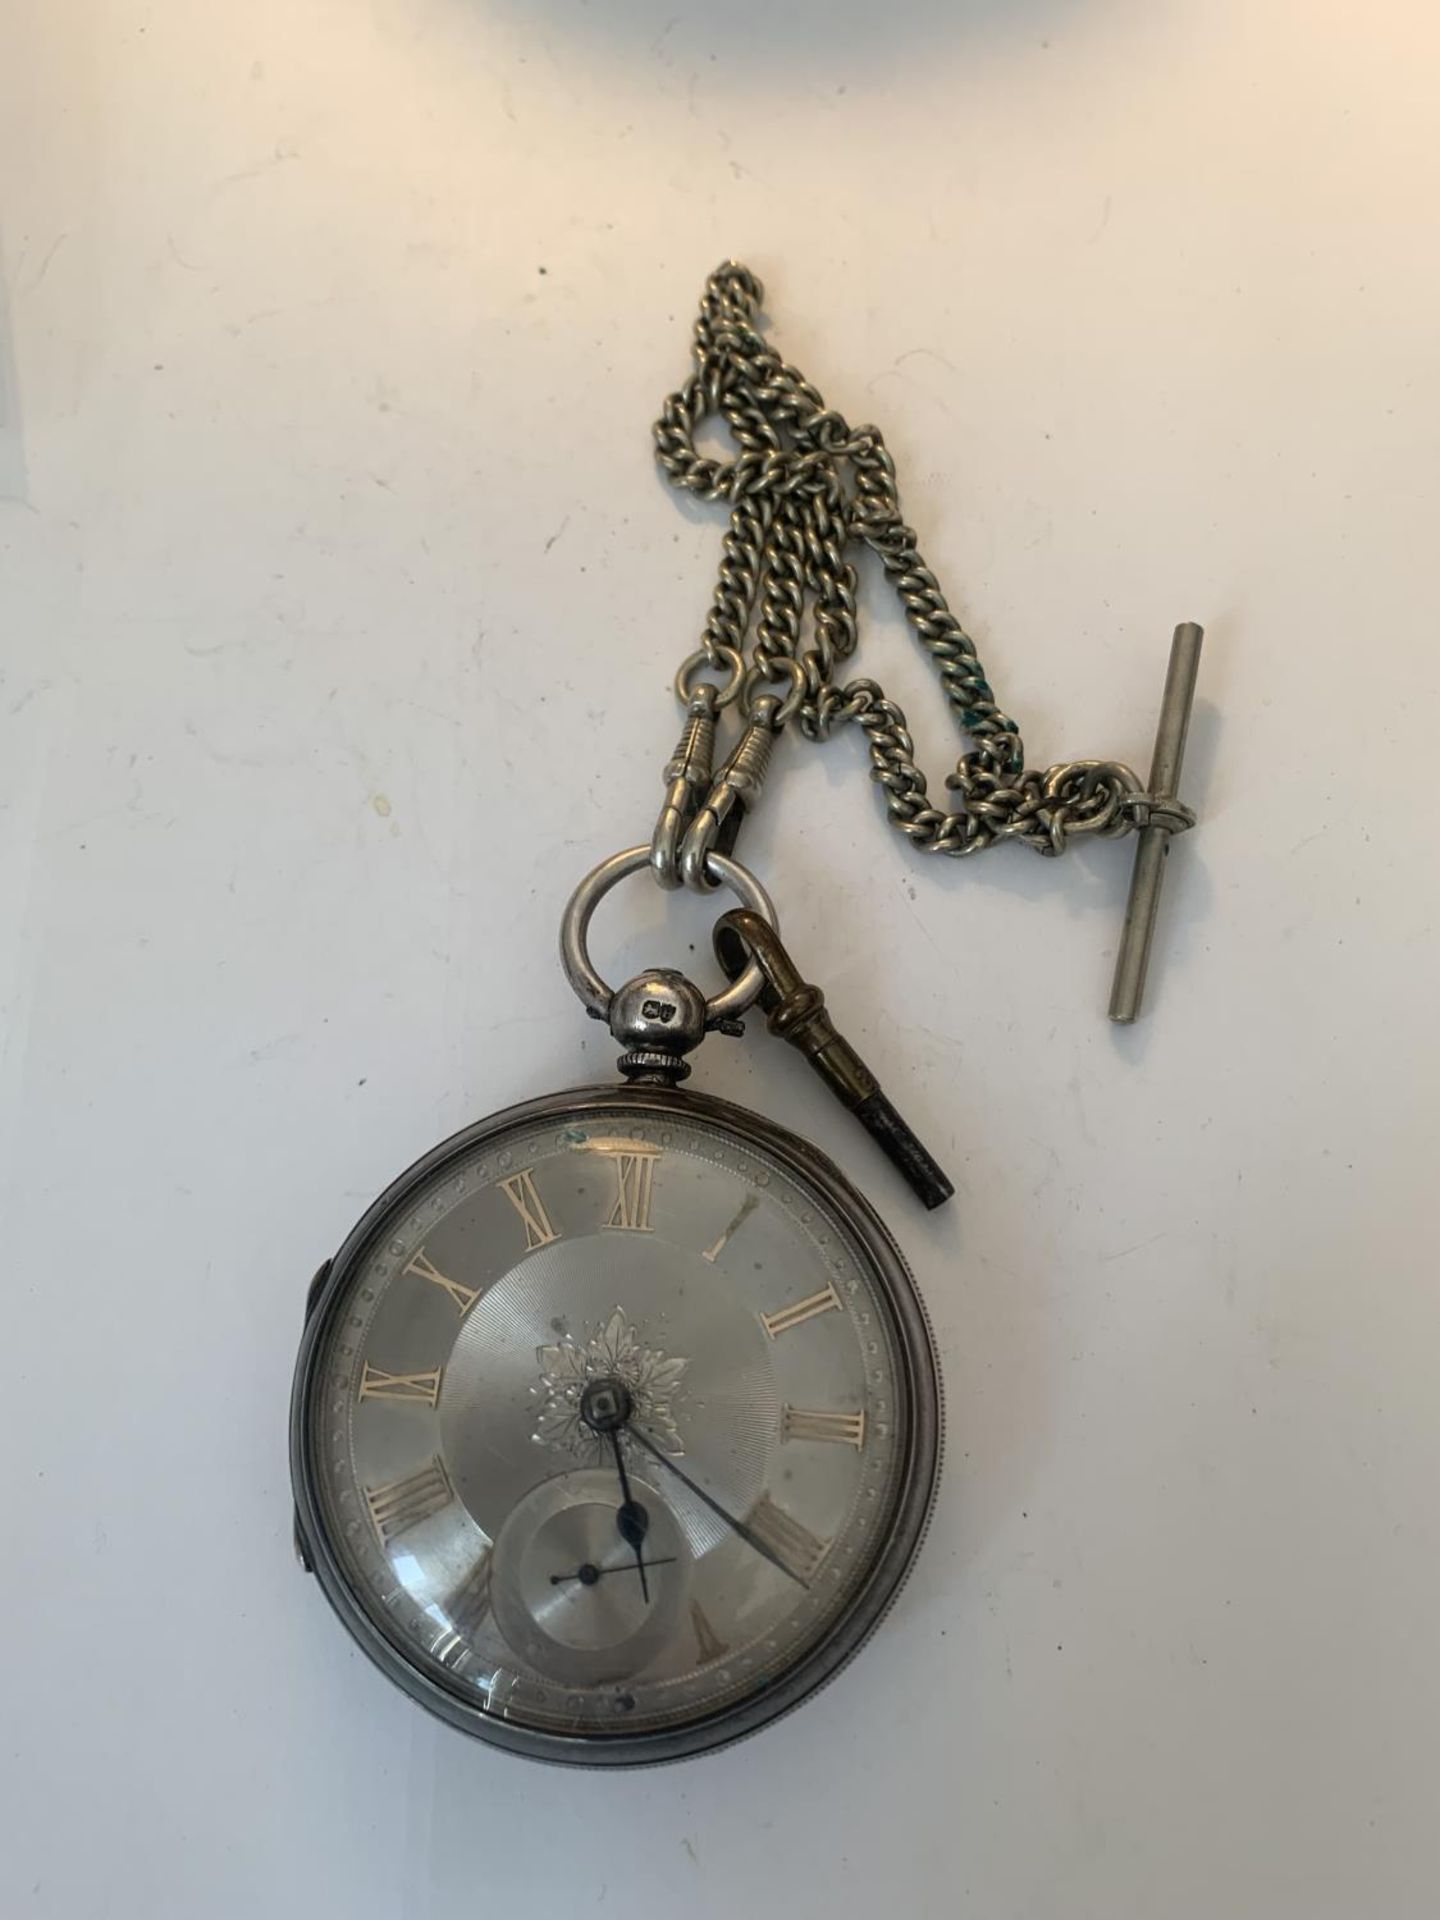 A HALLMARKED LONDON SILVER POCKET WATCH WITH DECORATIVE DIAL, ROMAN NUMERALS, SUB DAIL AND KEY ON